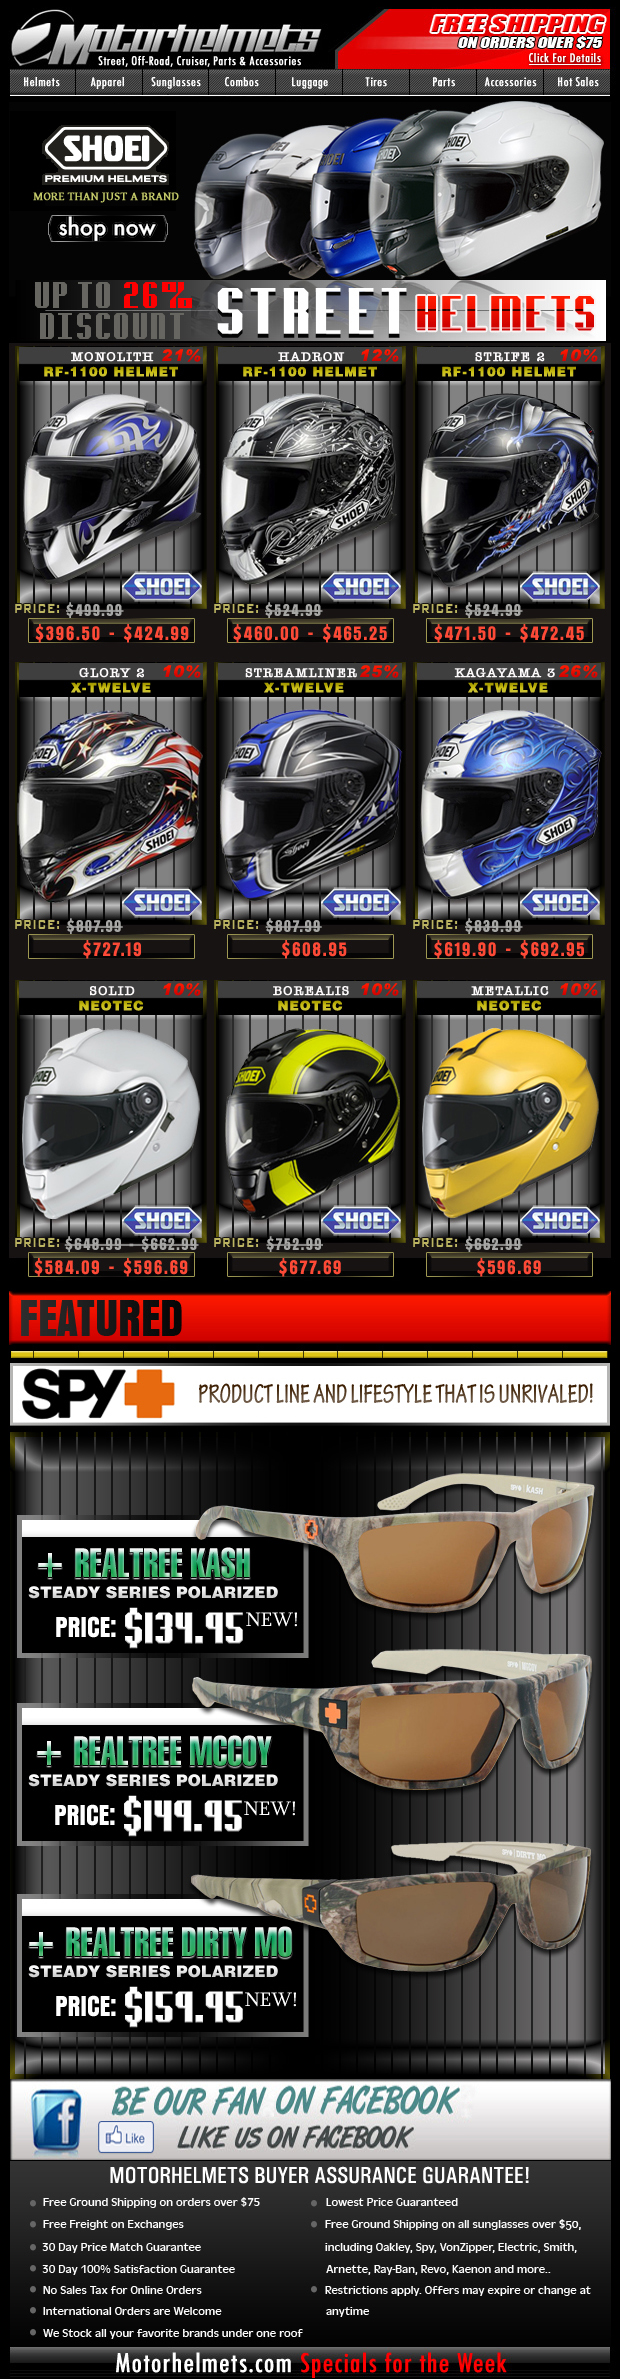 Shoei Spring Sale...up to 26% Off on Street Helmets!